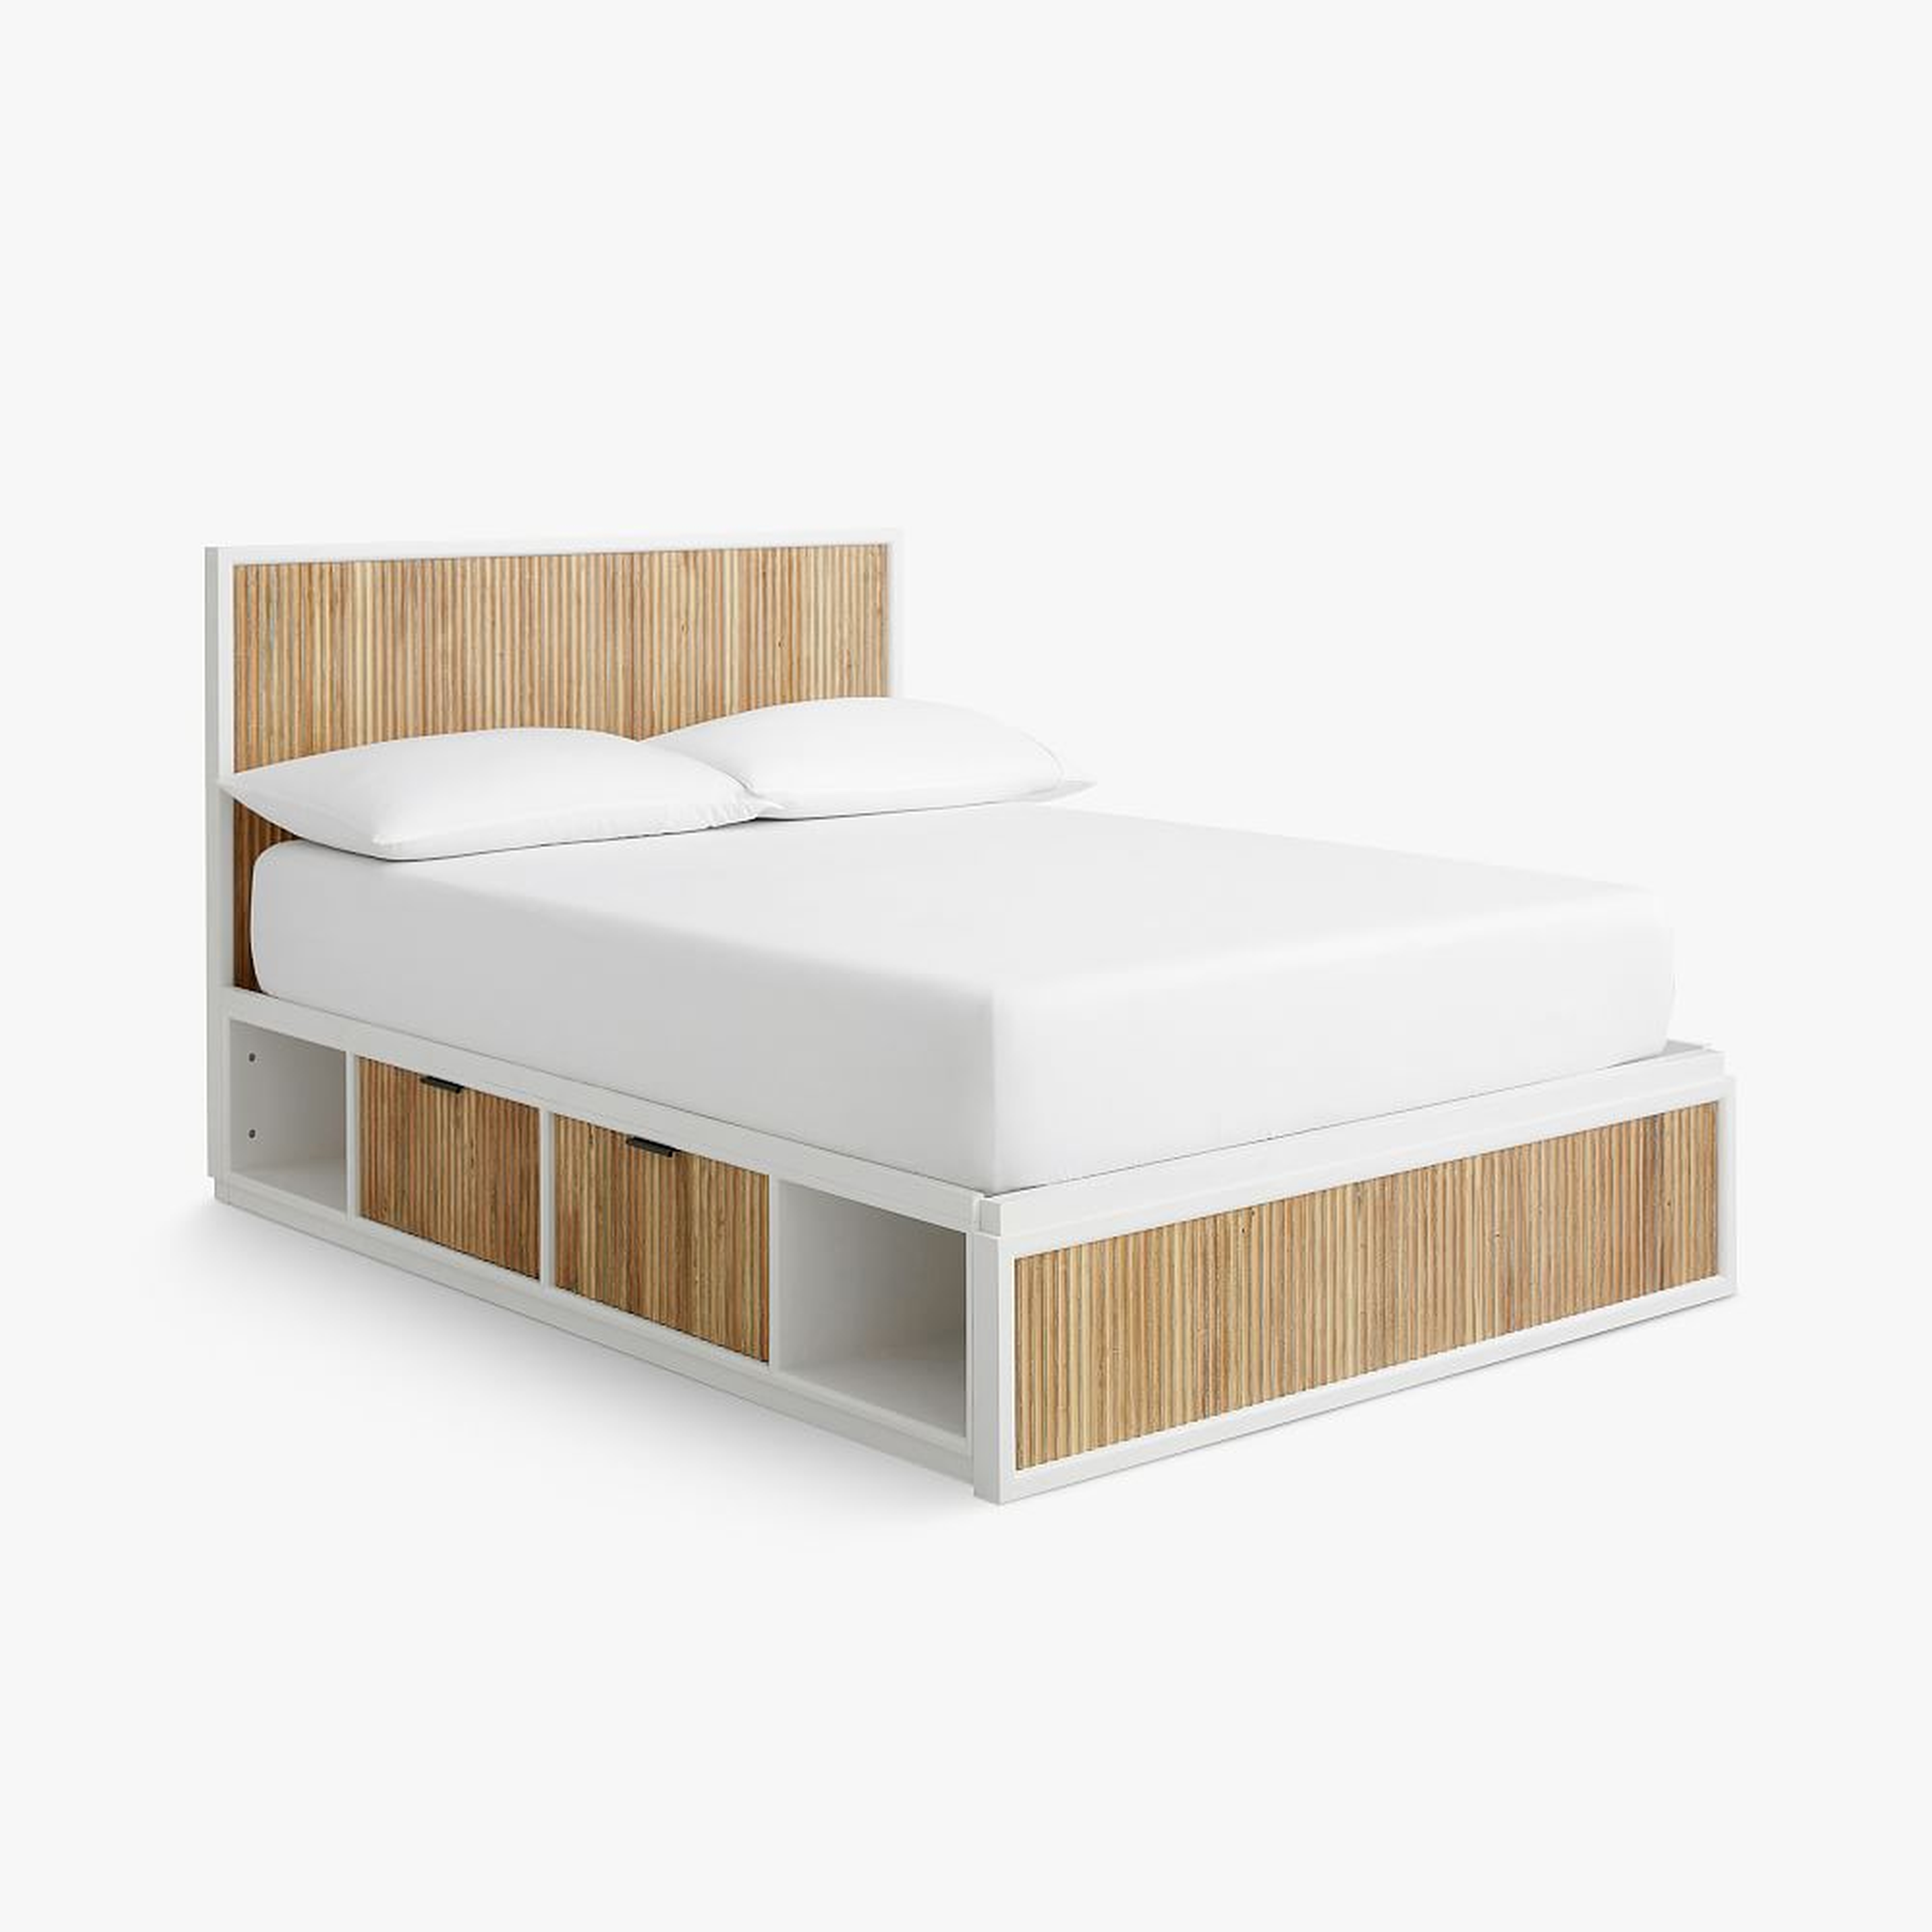 west elm x pbt Quinn Storage Bed, Queen, White & Cerused White - Pottery Barn Teen